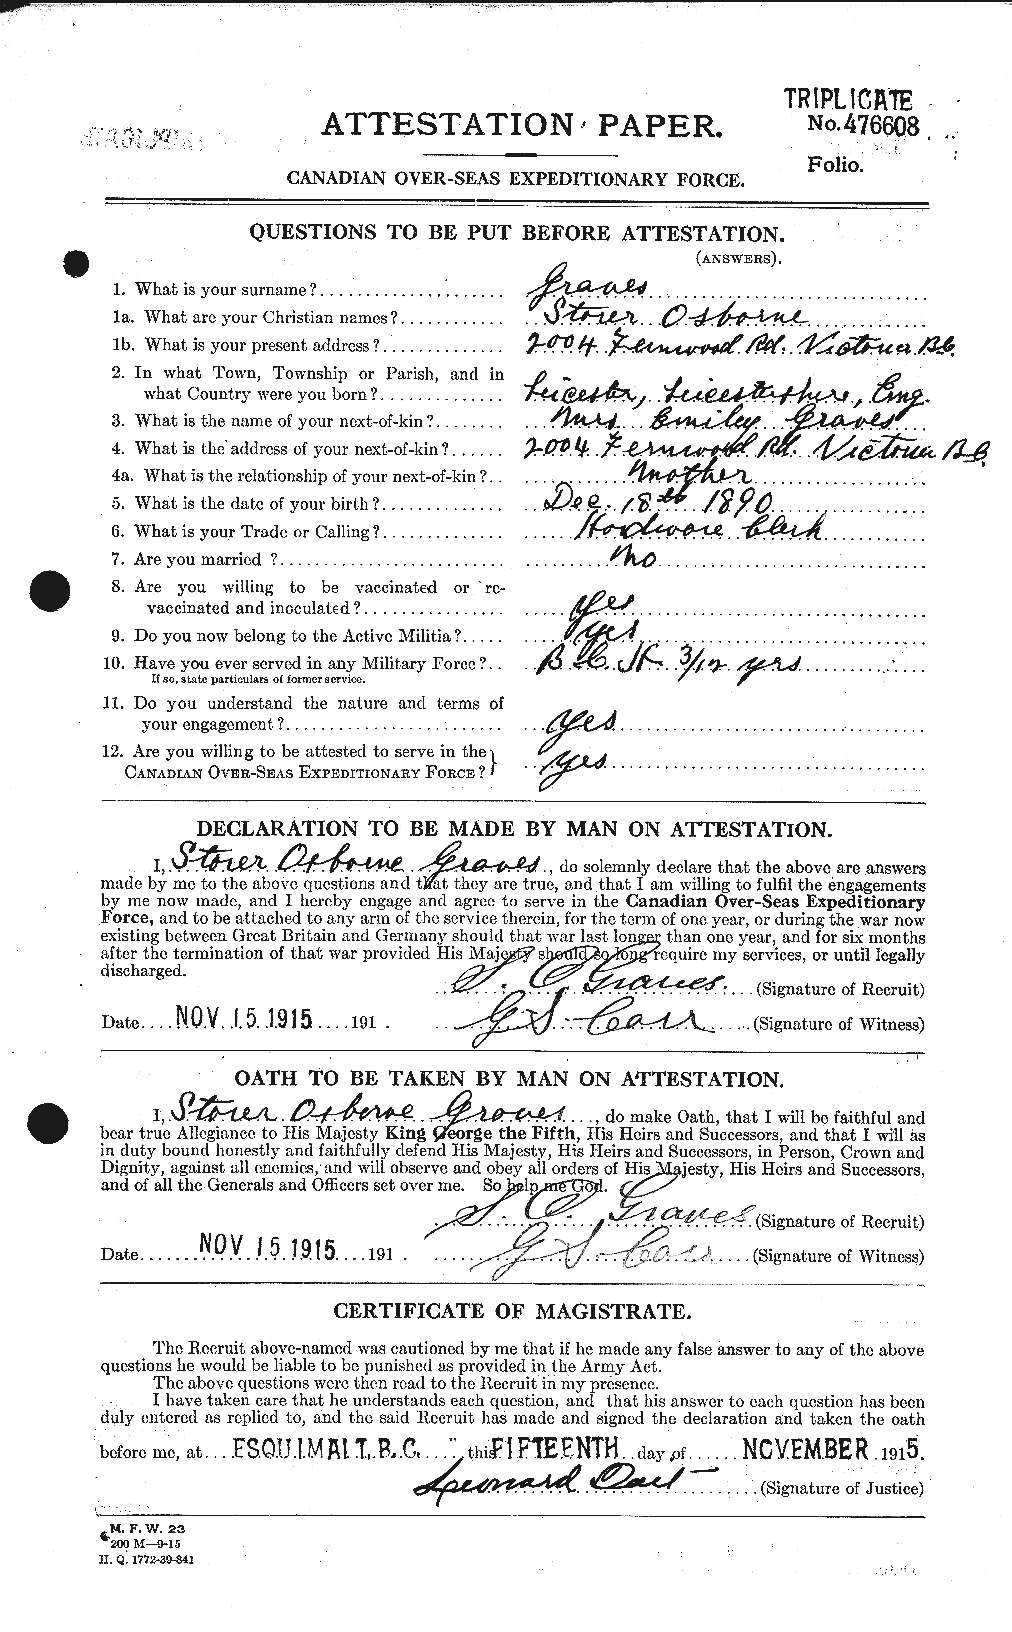 Personnel Records of the First World War - CEF 359855a